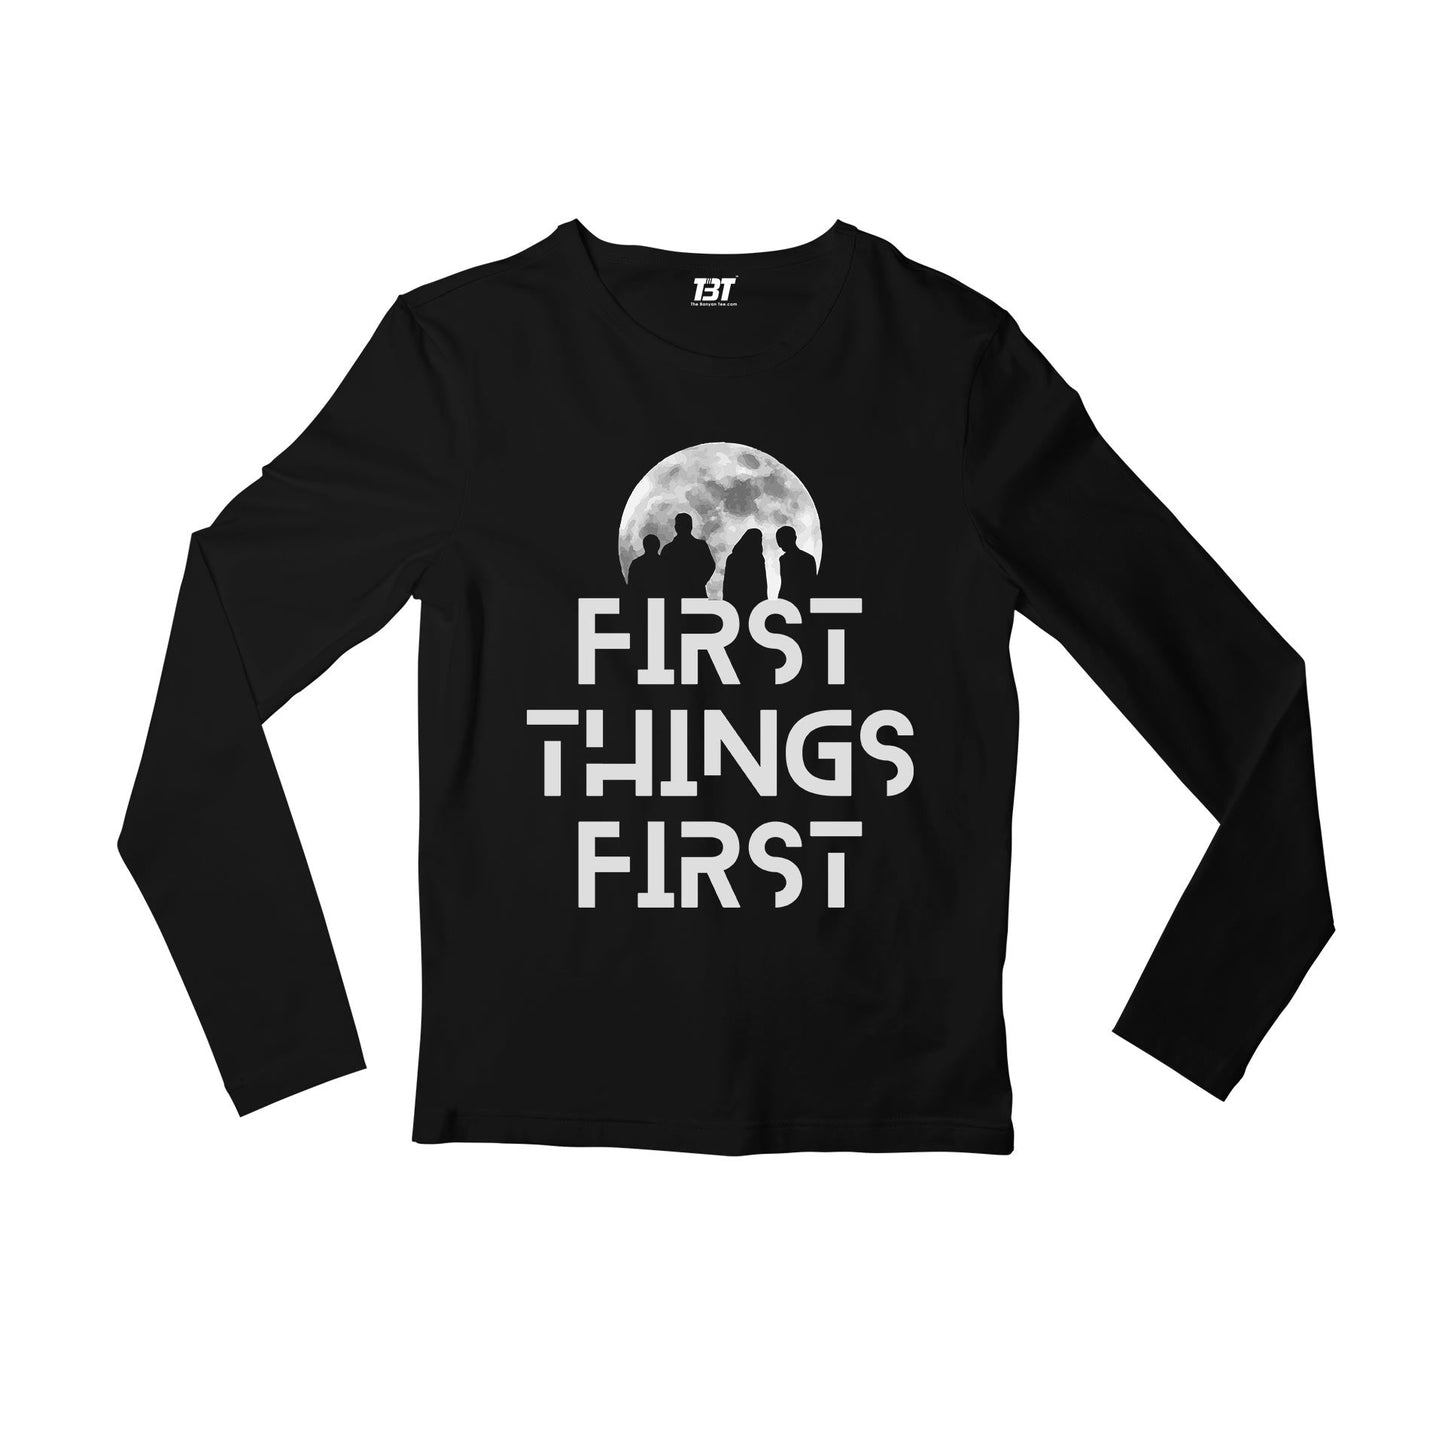 imagine dragons first things first full sleeves long sleeves music band buy online india the banyan tee tbt men women girls boys unisex black believer